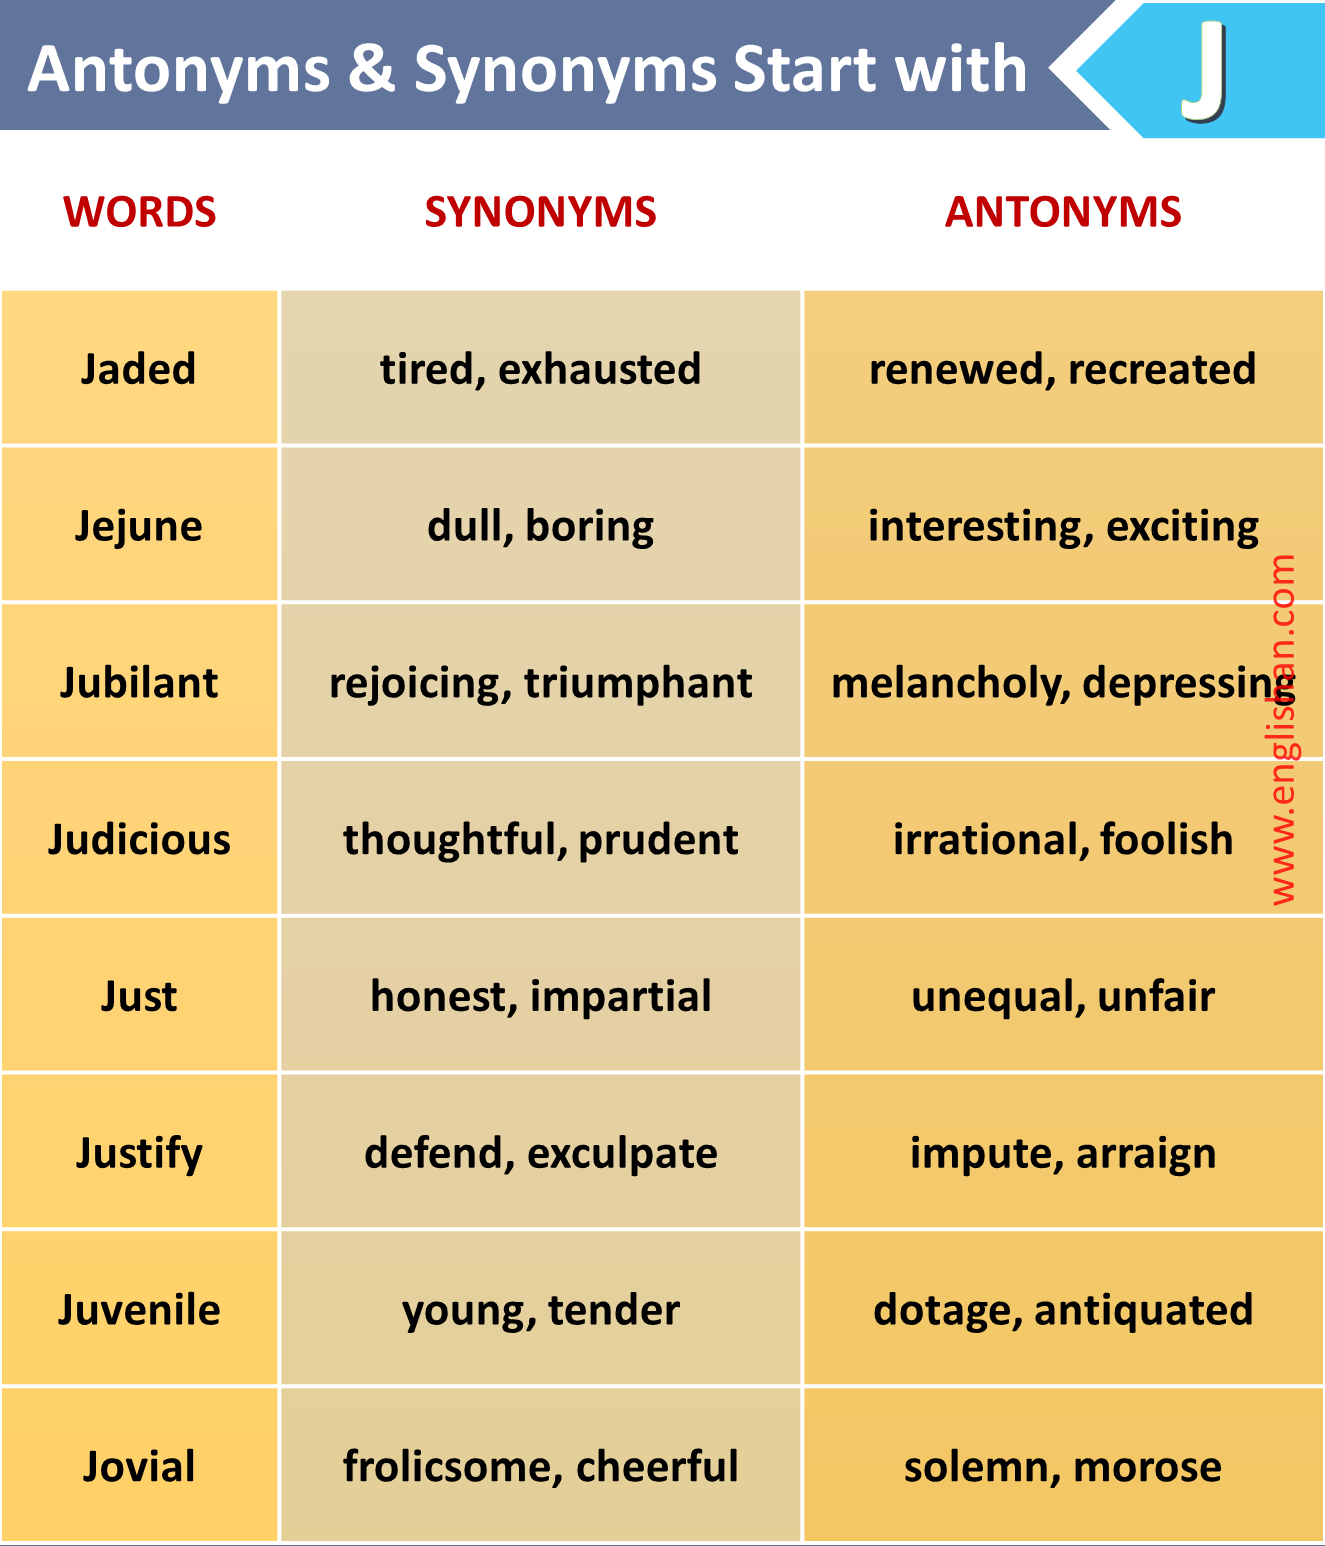 List of 1000 + Antonyms and Synonyms A to Z